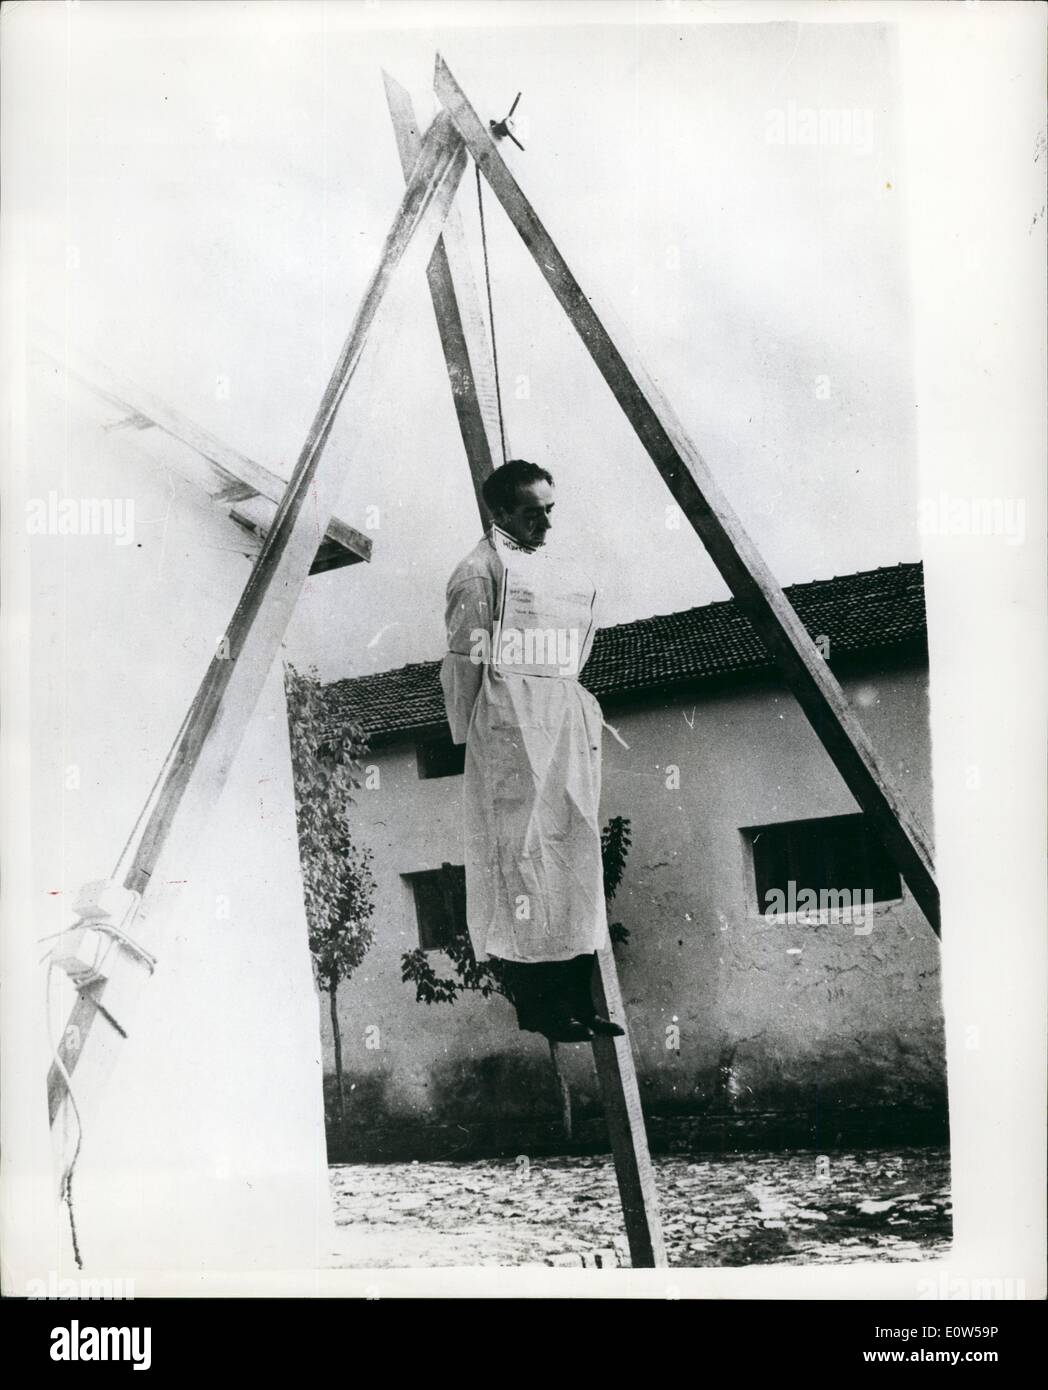 Sep. 09, 1961 - Adnan Menderes hanged at Istambul on Sunday: Ex-Premier Adnan Menderes of Turkey was hanged at Istambul on Sunday after he was convicted on charged laid by the current Turkish Government. Two other members of the former Government were also executed a day earlier. Photo shows Menderes hanging from the scaffold. Stock Photo